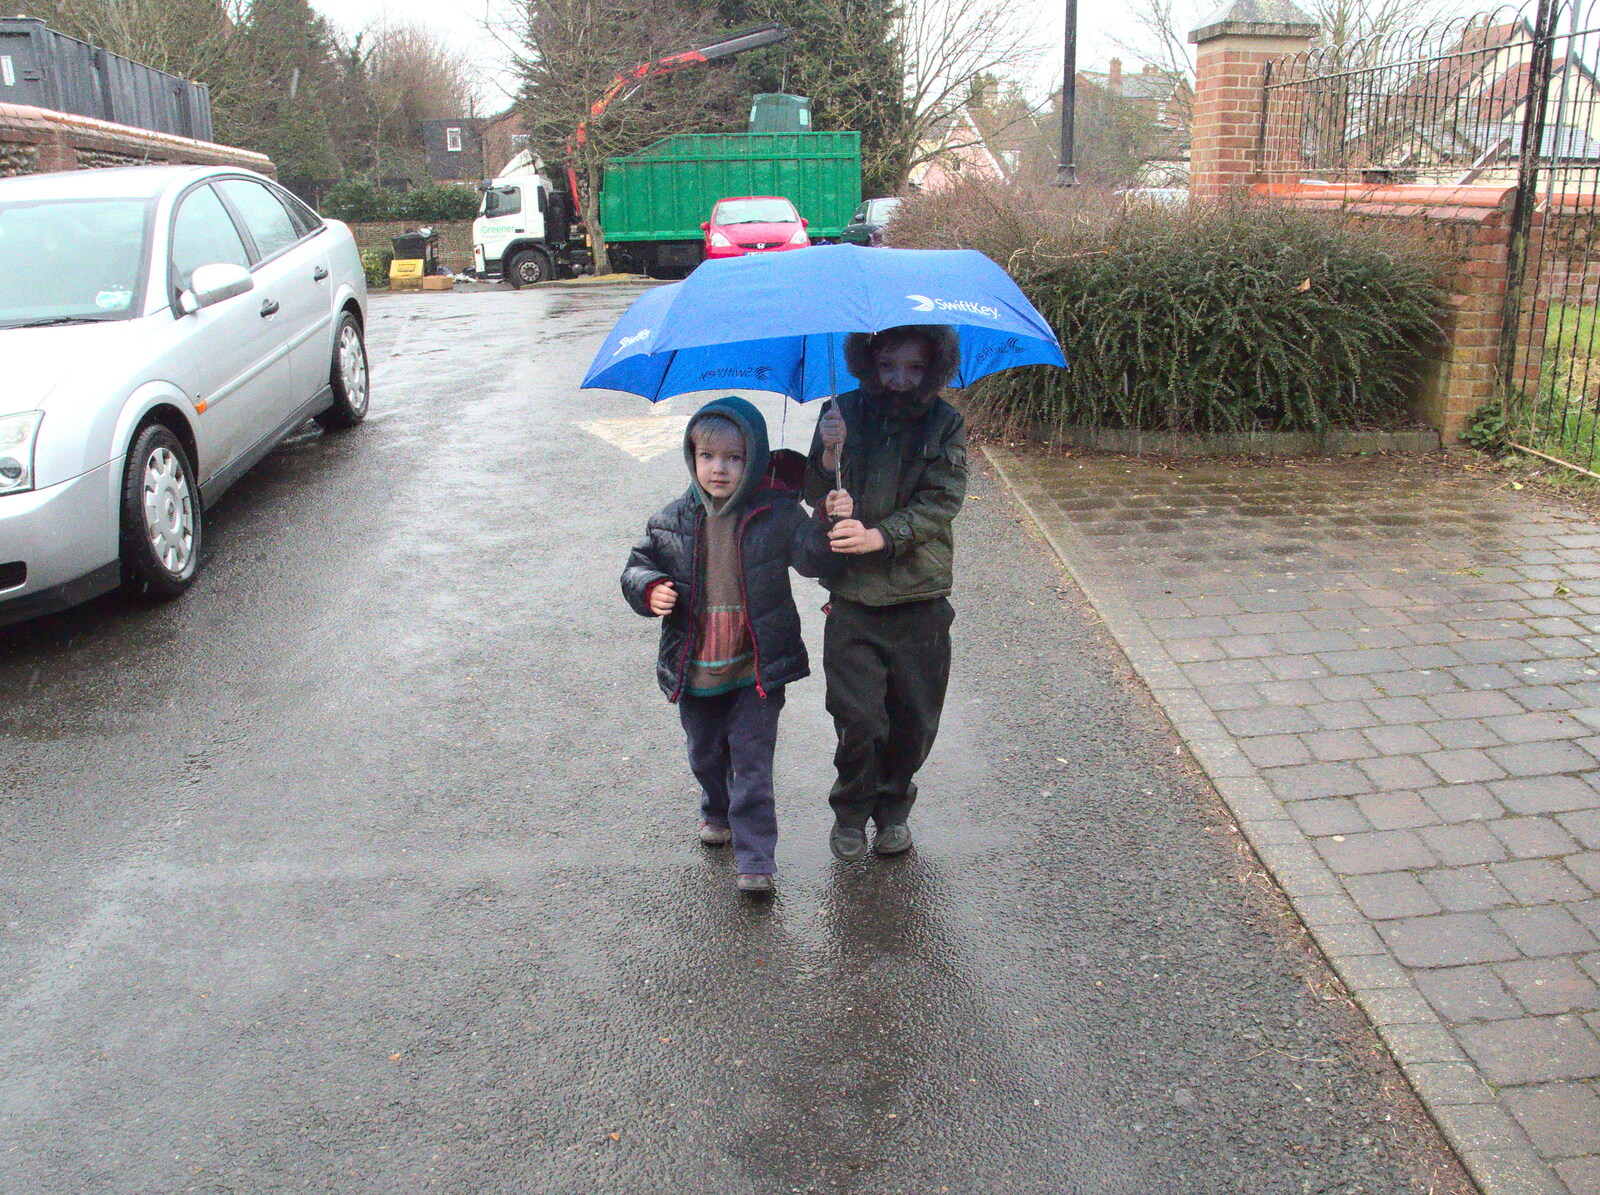 Harry and Fred under an umbrella from The Last Day of Pre-School and Beer at the Trowel and Hammer, Cotton, Suffolk - 29th March 2015